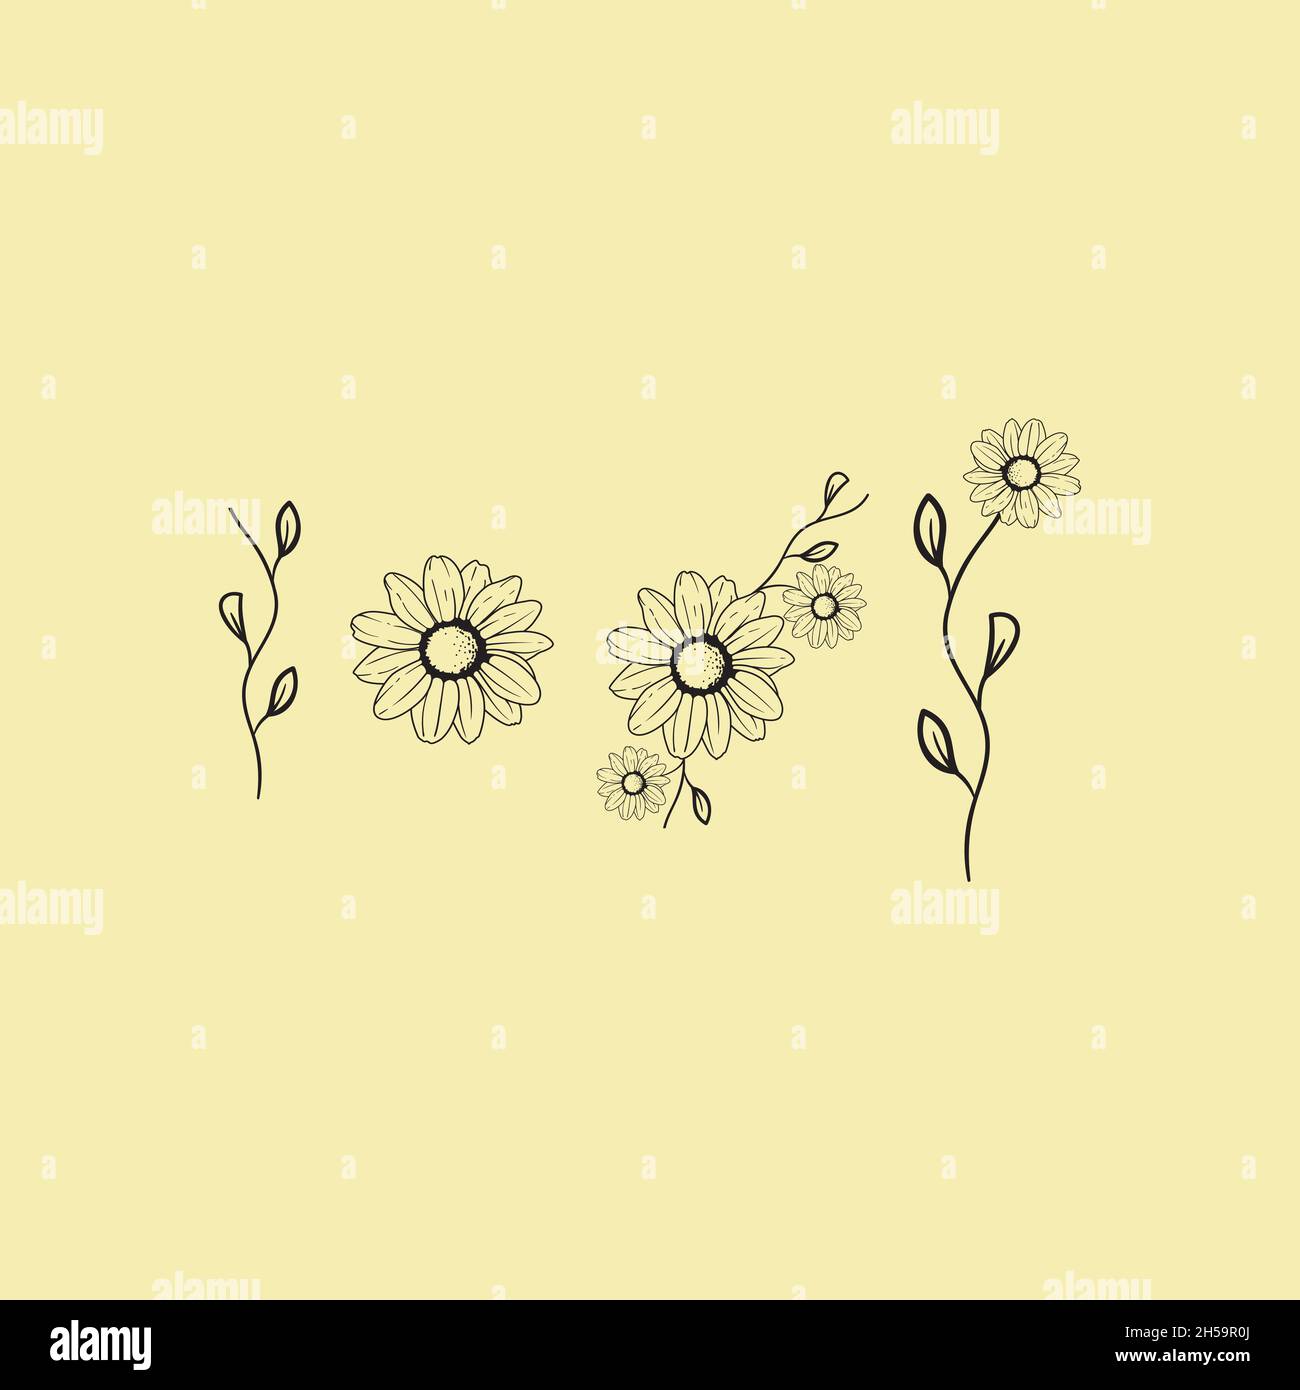 contains several floral motifs with different styles. Stock Vector